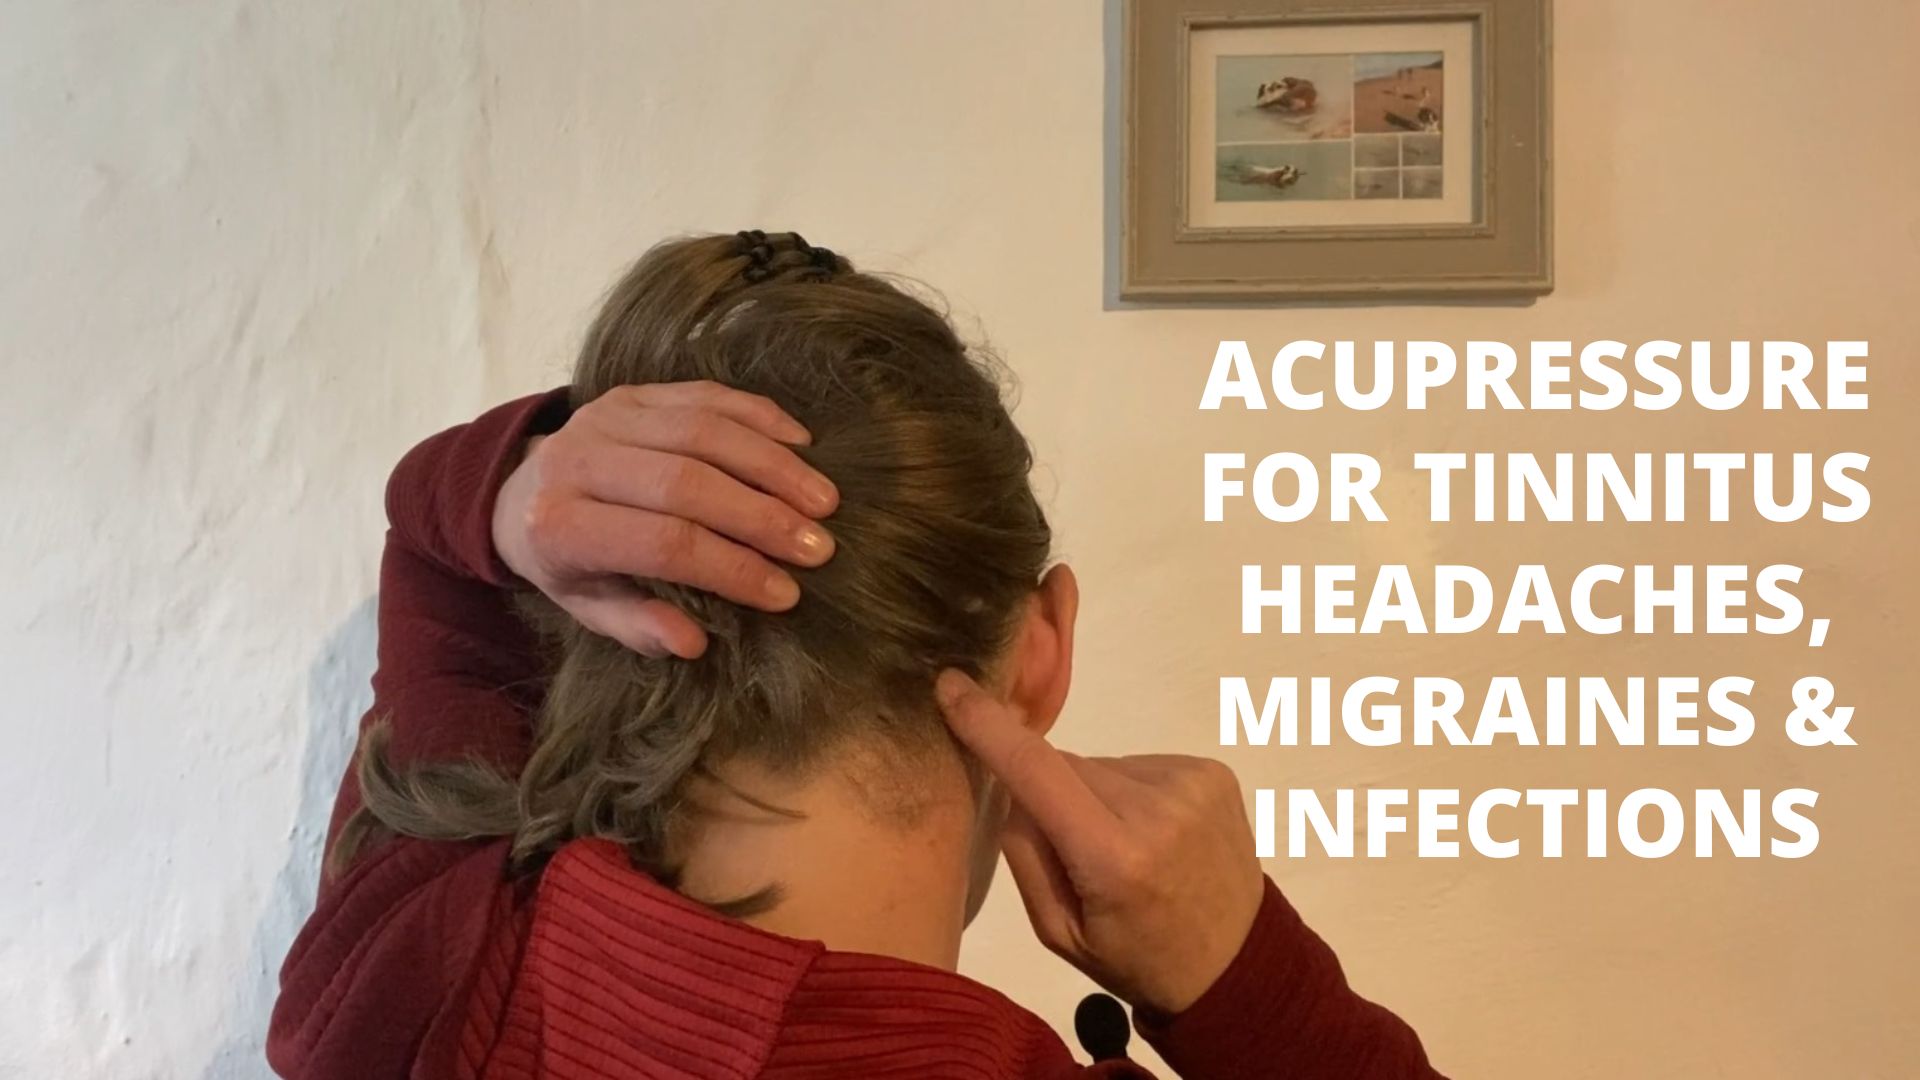 Acupressure for Tinnitus, Headaches, Migraines & Infections: Fengchi